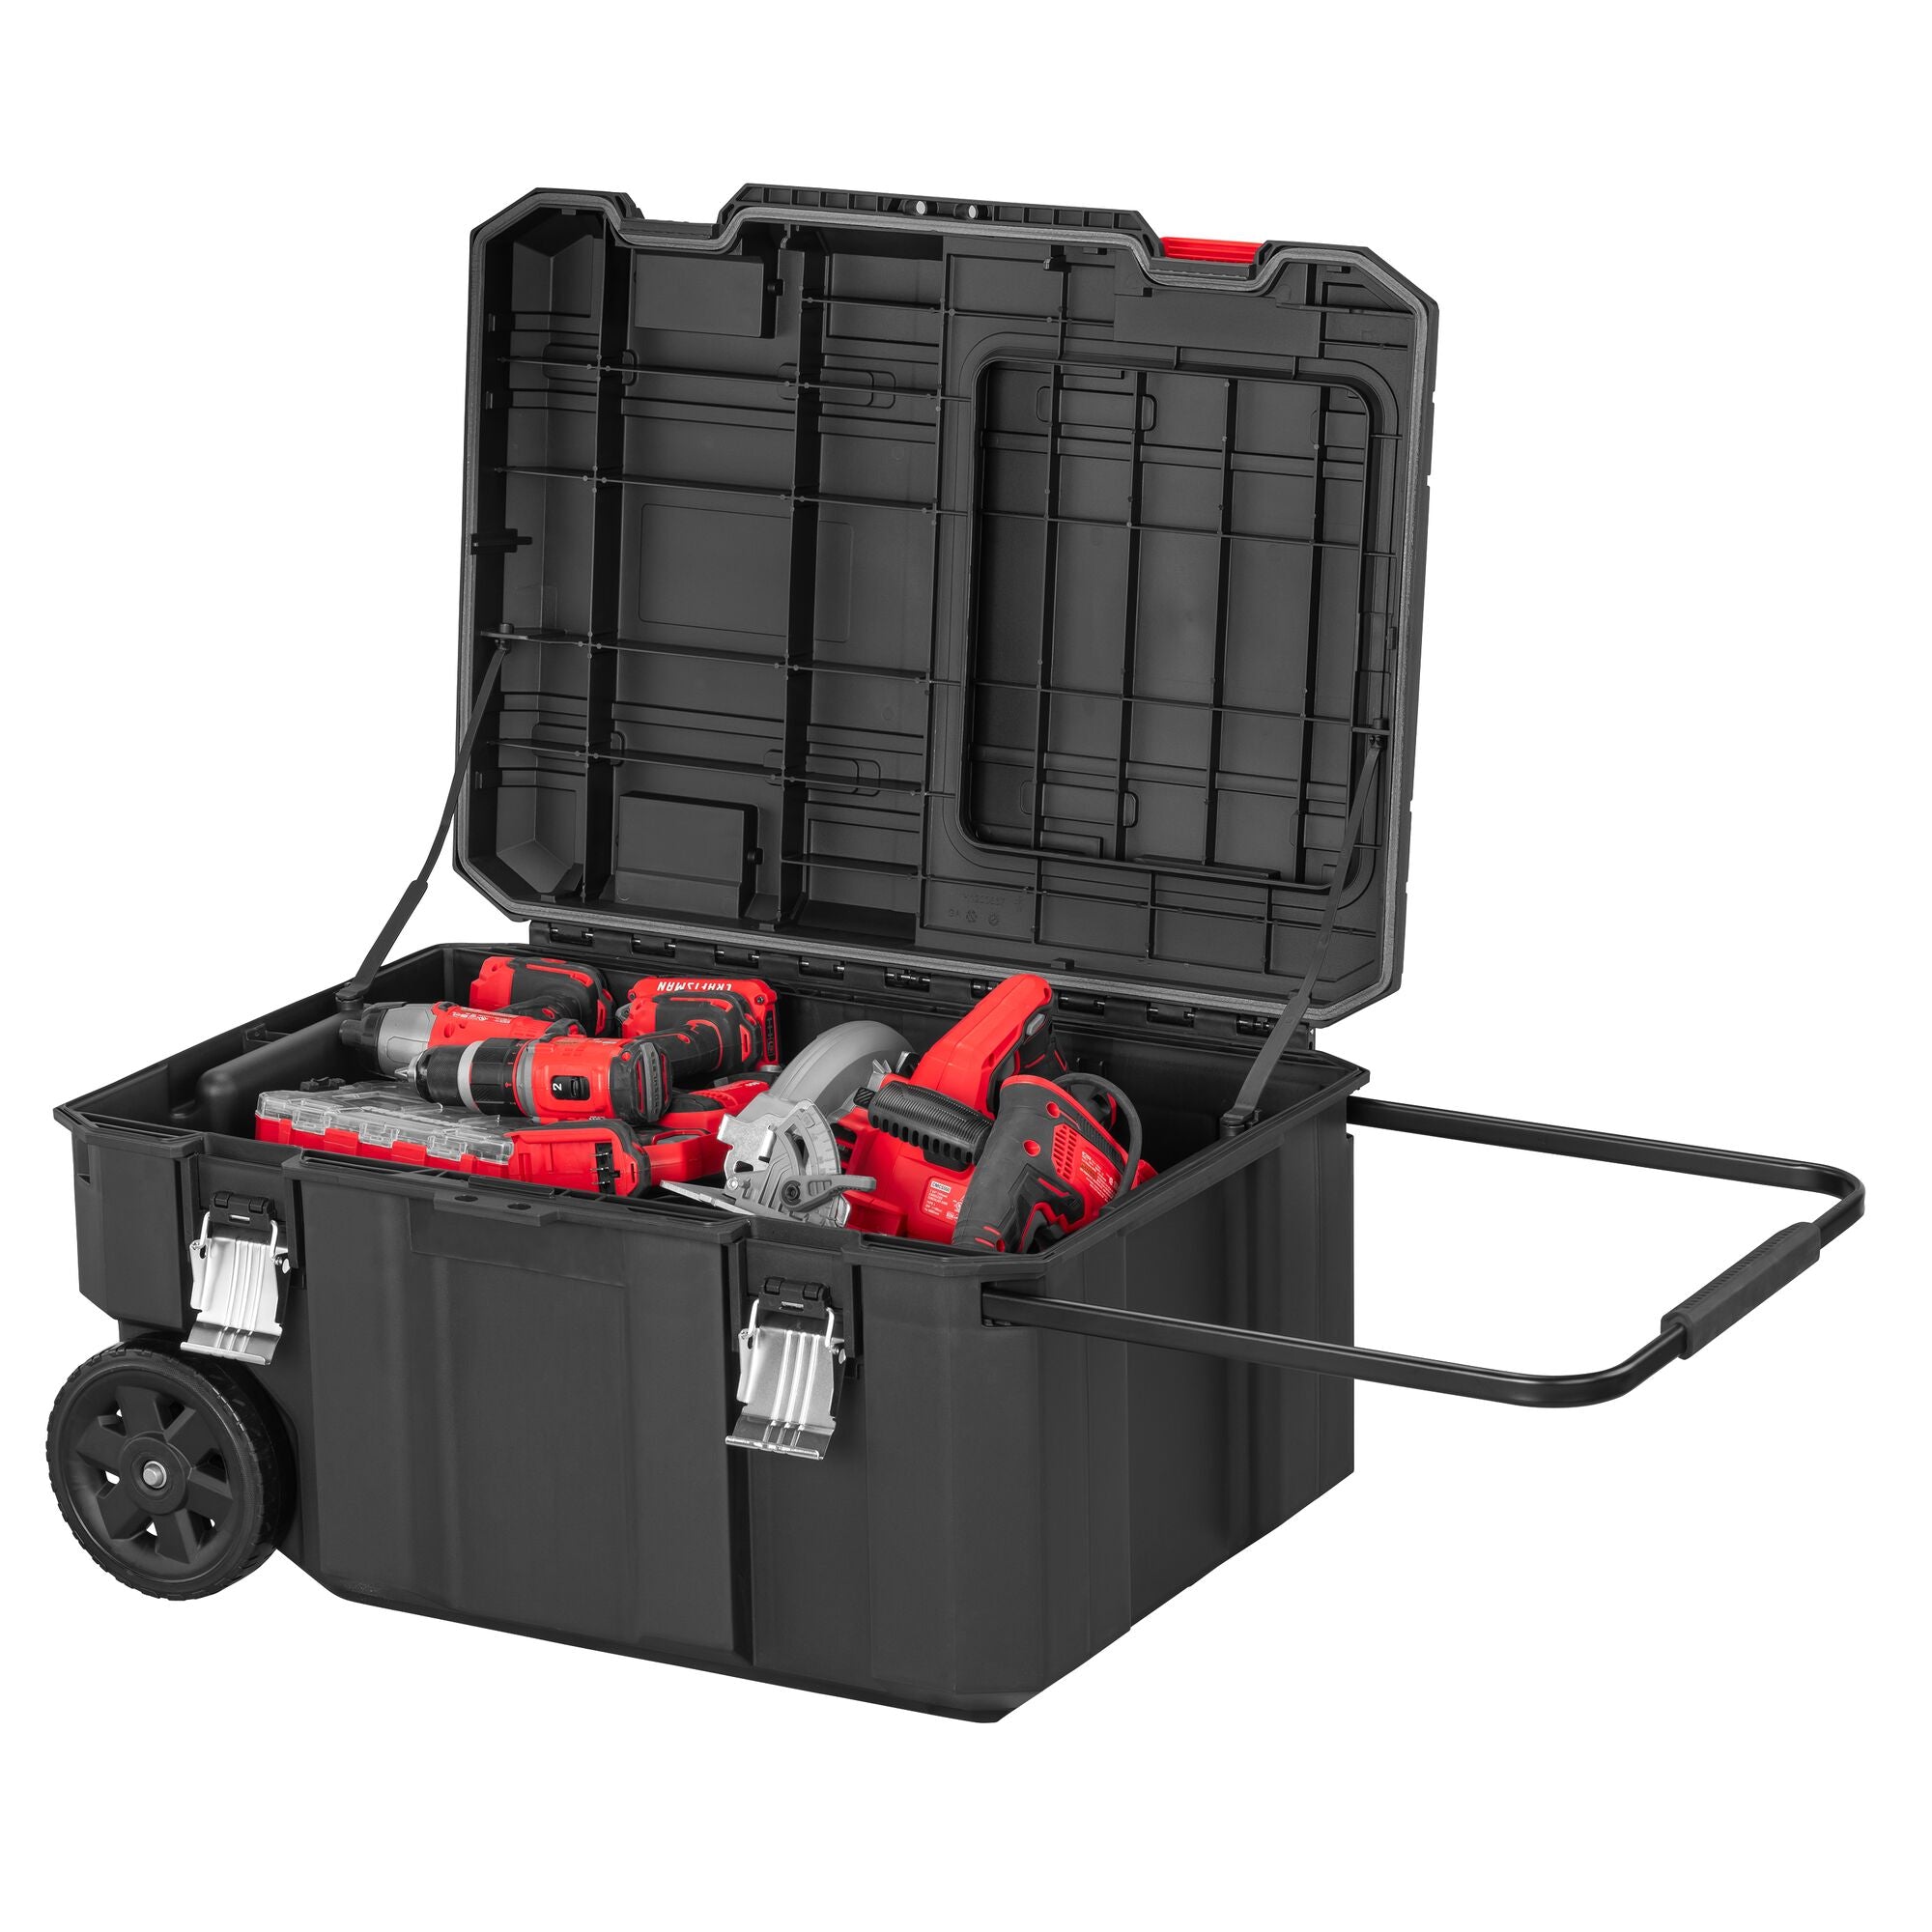 CRAFTSMAN VERSASTACK 30 Gallon Chest with full lid open and tools inside